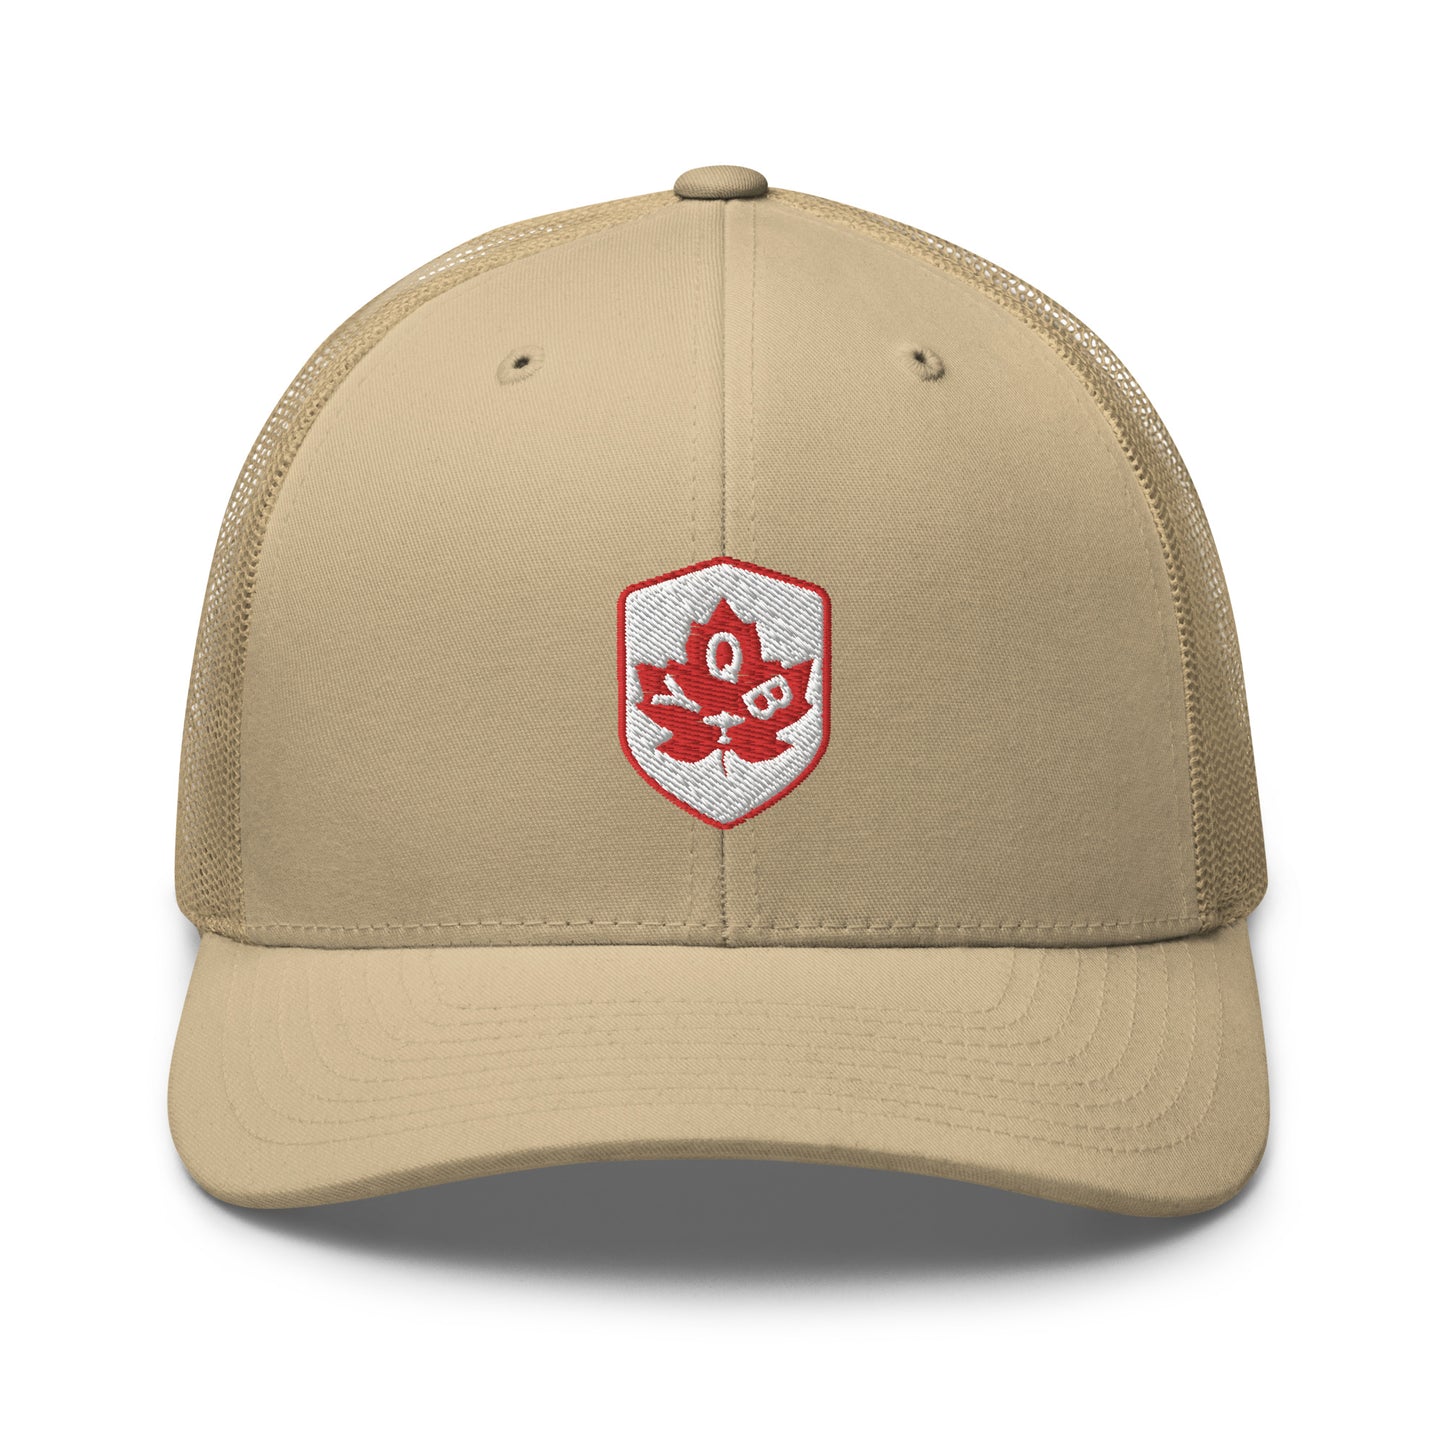 Maple Leaf Trucker Hat - Red/White • YQB Quebec City • YHM Designs - Image 26